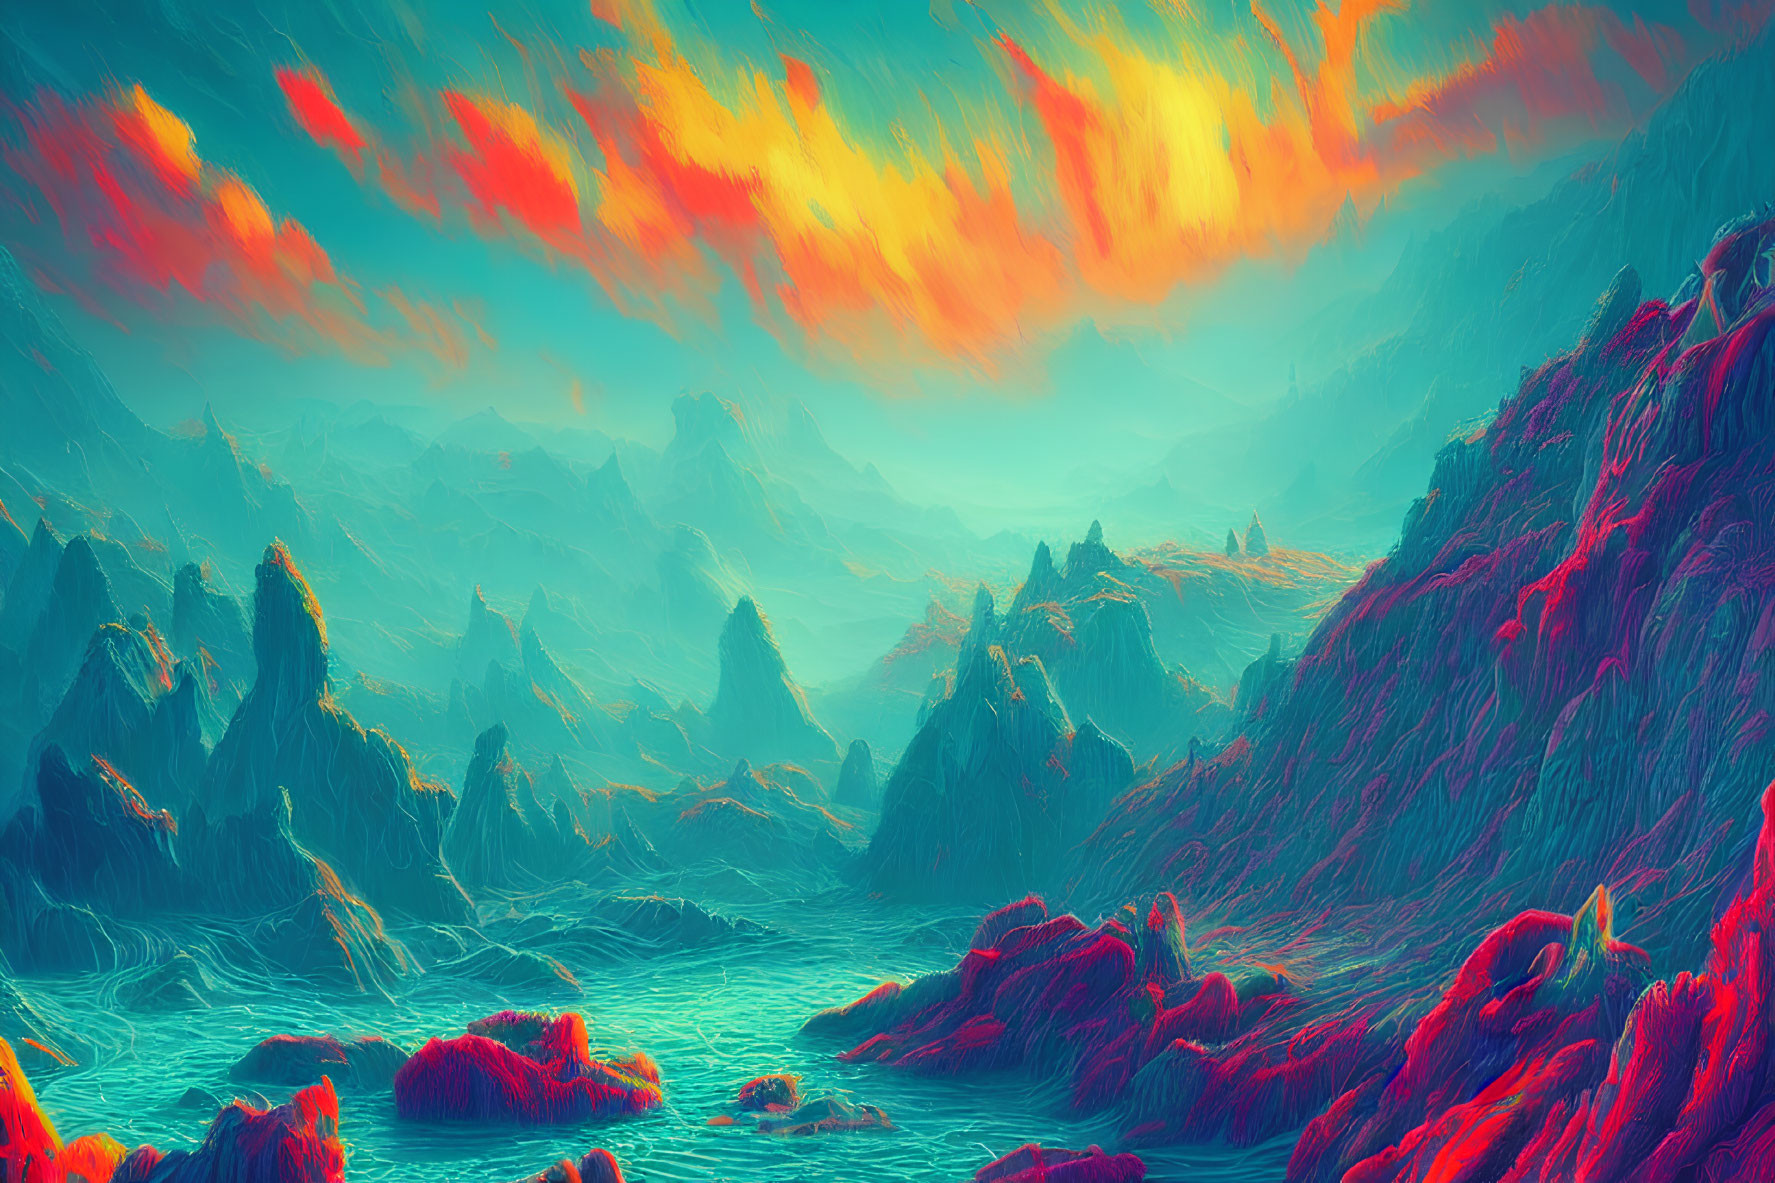 Surreal landscape with layered mountains under fiery sky